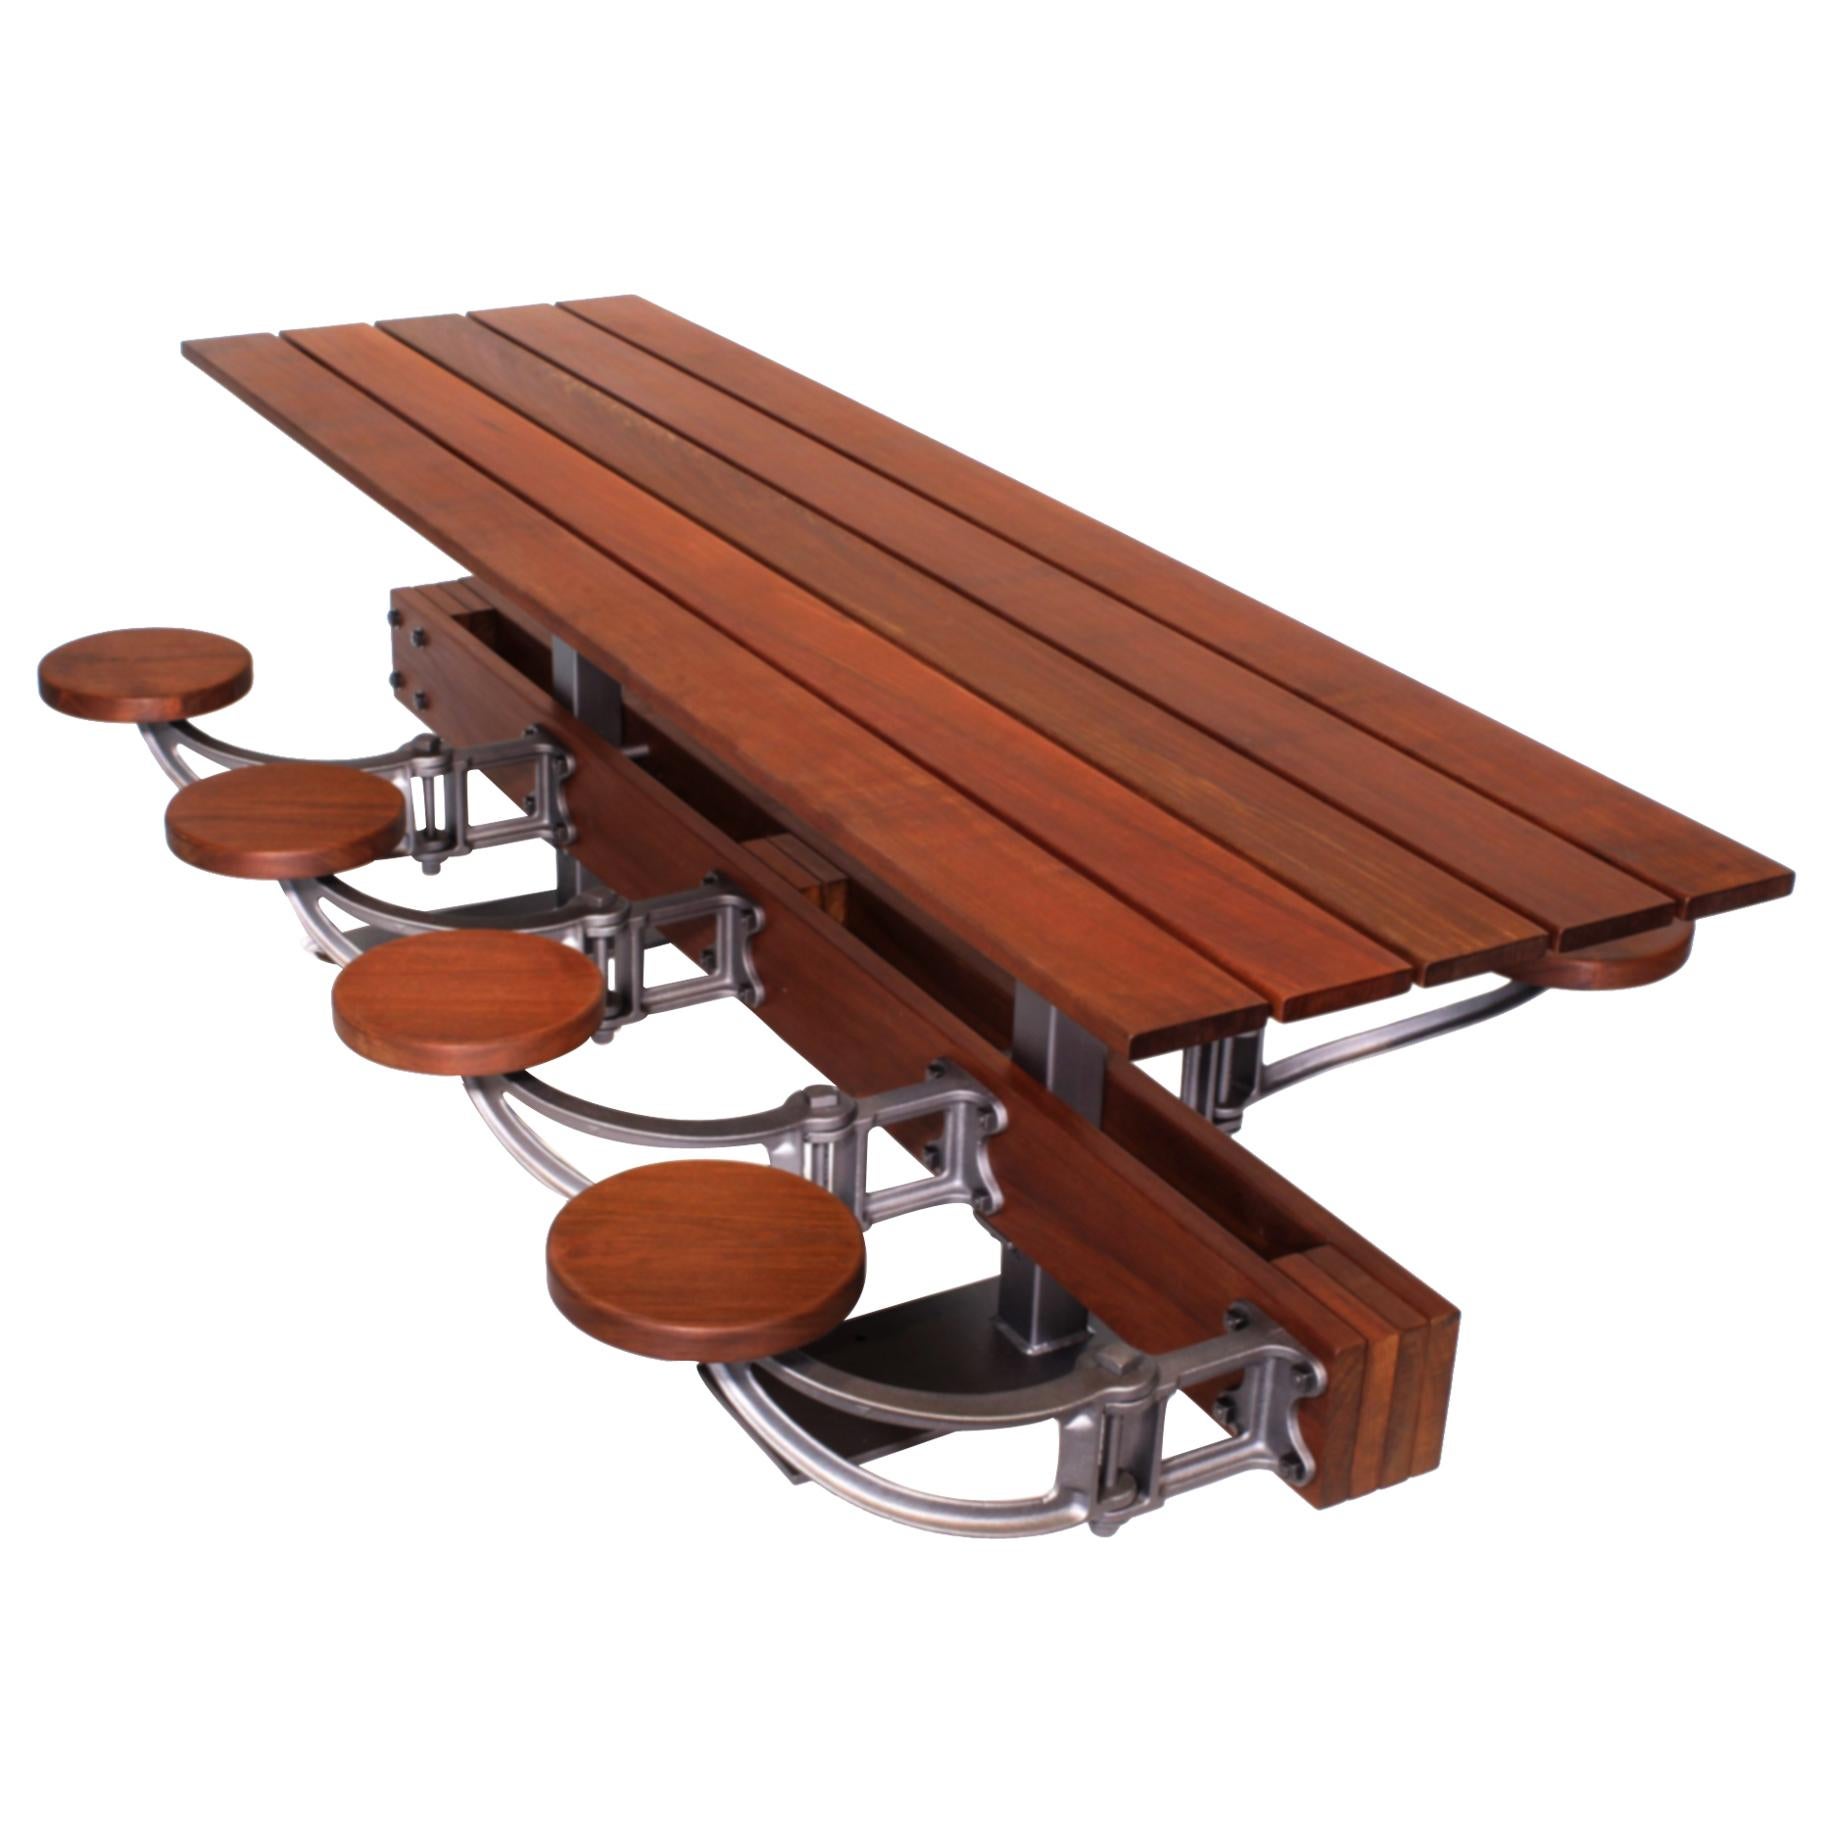 Picnic Table, Outdoor Patio Dining Table with Swing Out Seats